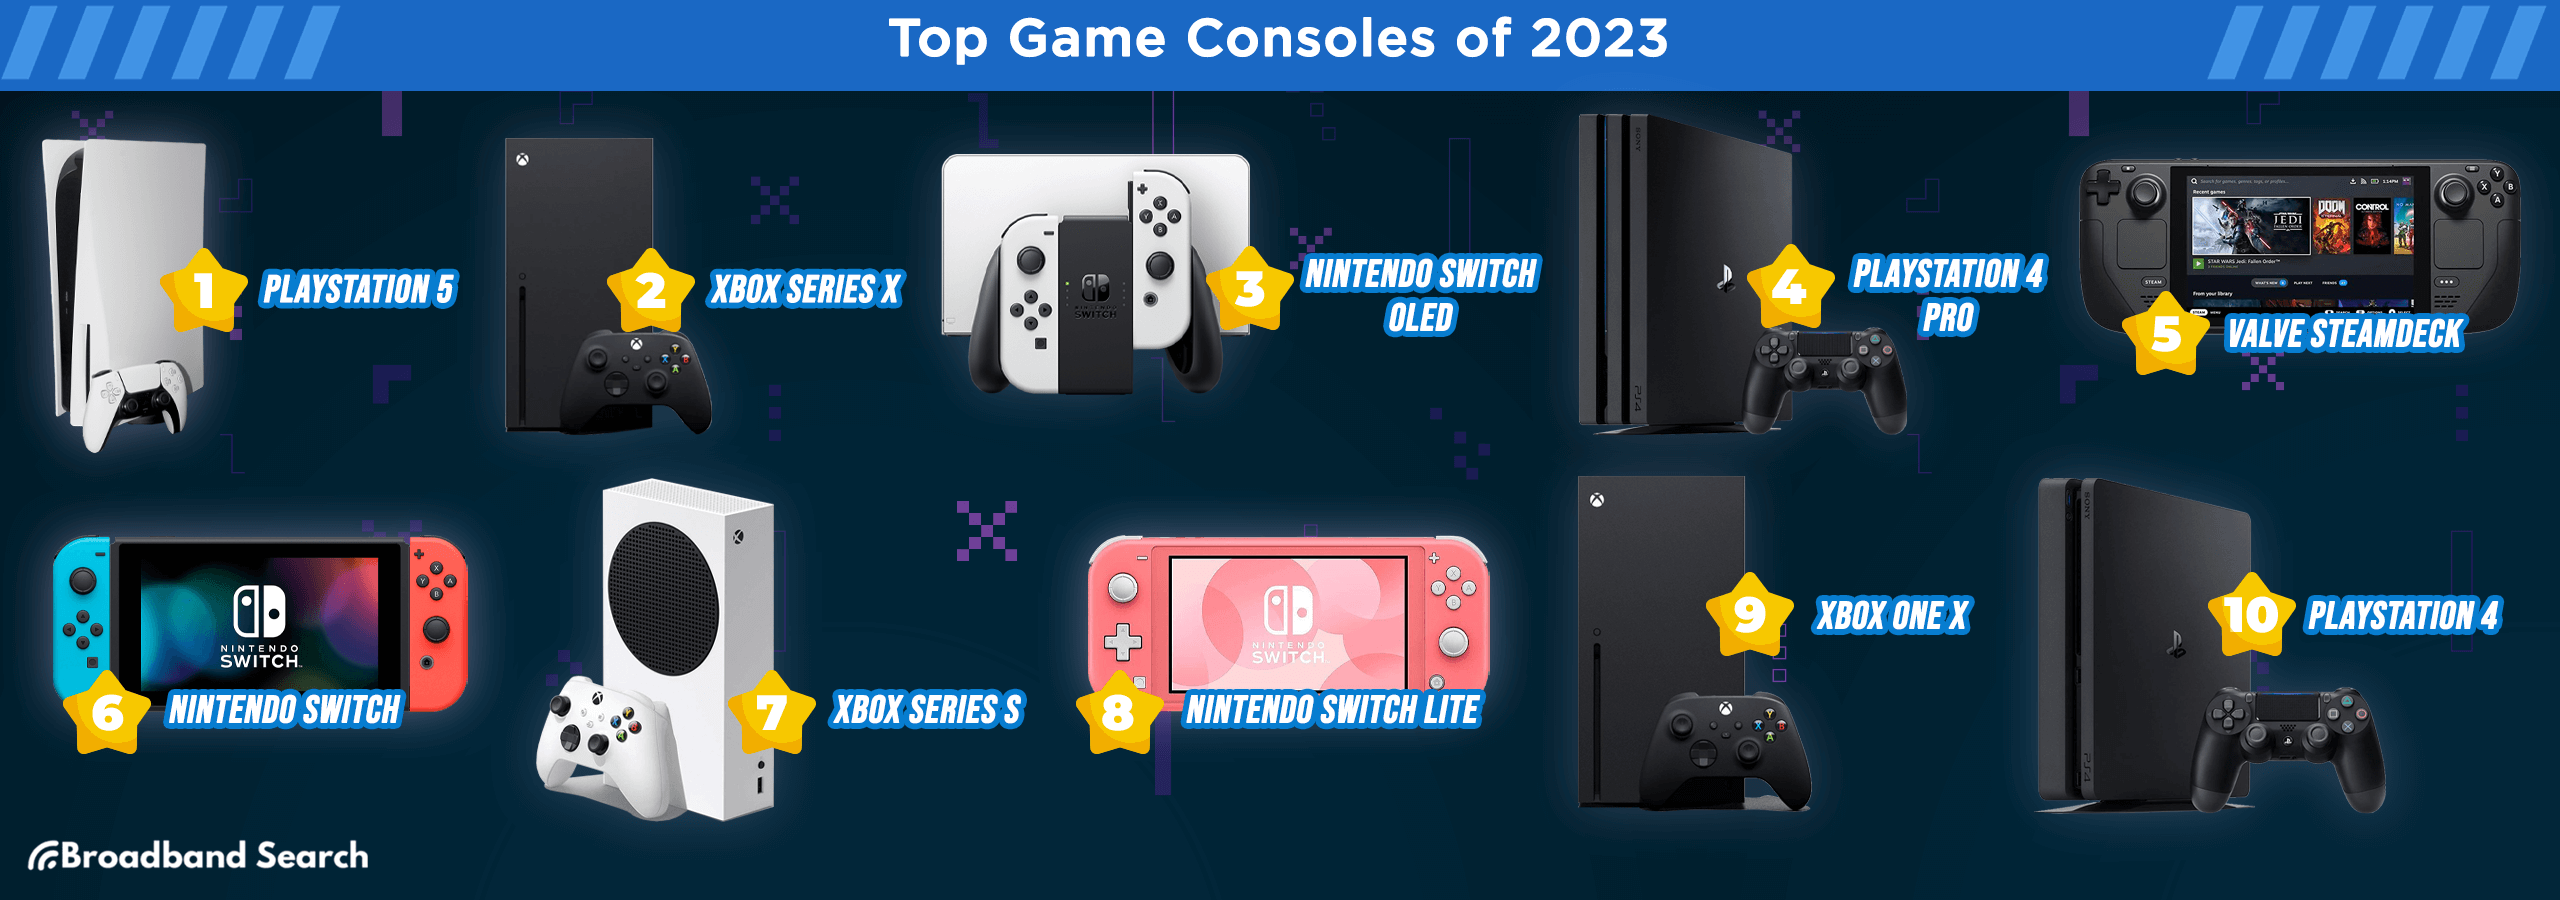 Top game consoles of 2023